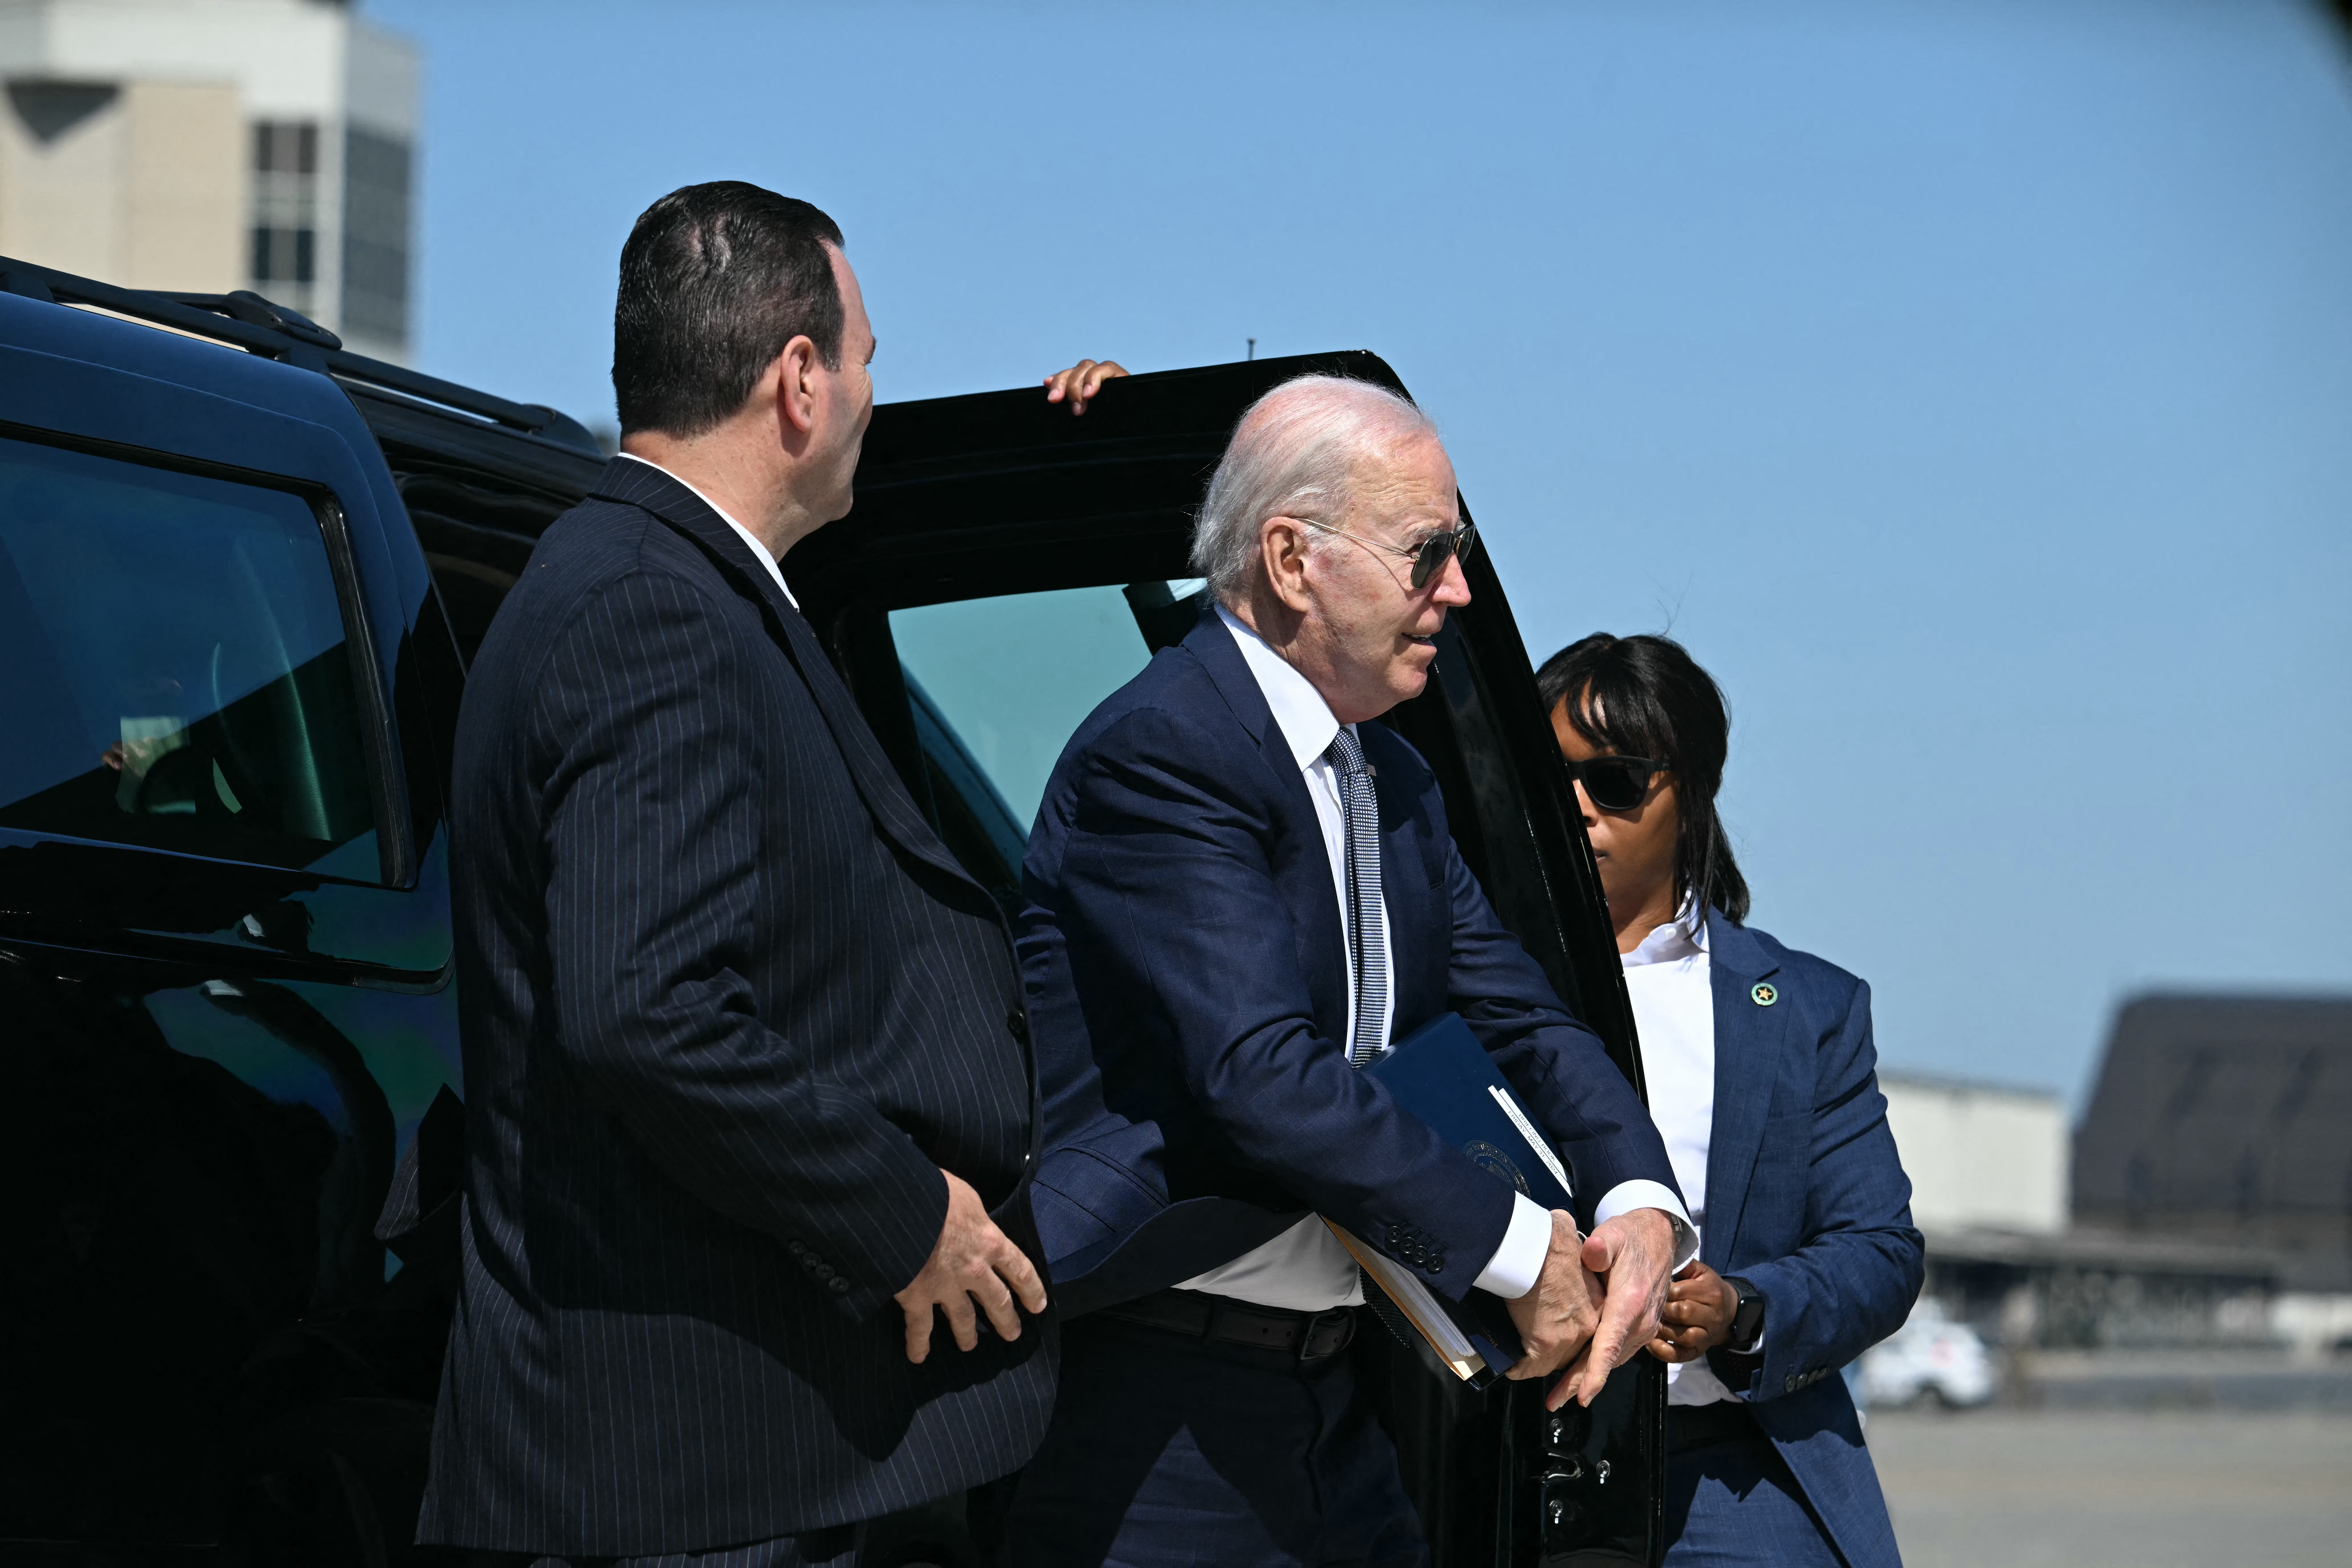 US President Joe Biden exits his motorcade and walks to board Air Force One enroute to Washington, DC at Dover Air Force Base in Dover, Delaware on May 31, 2024. (Photo by Jim WATSON / AFP) (Photo by JIM WATSON/AFP via Getty Images)